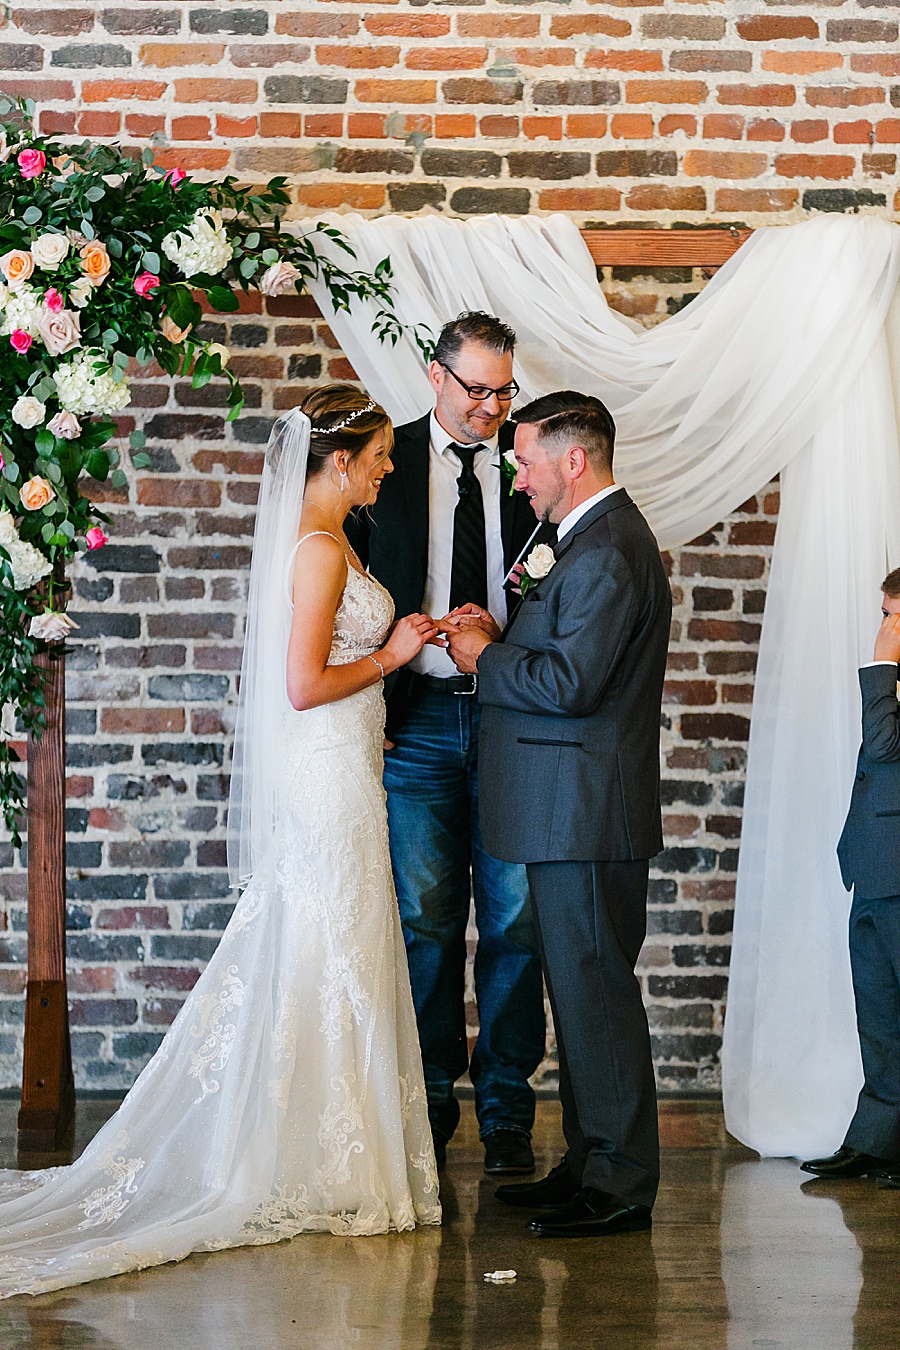 exchanging rings at a wedding at the press room